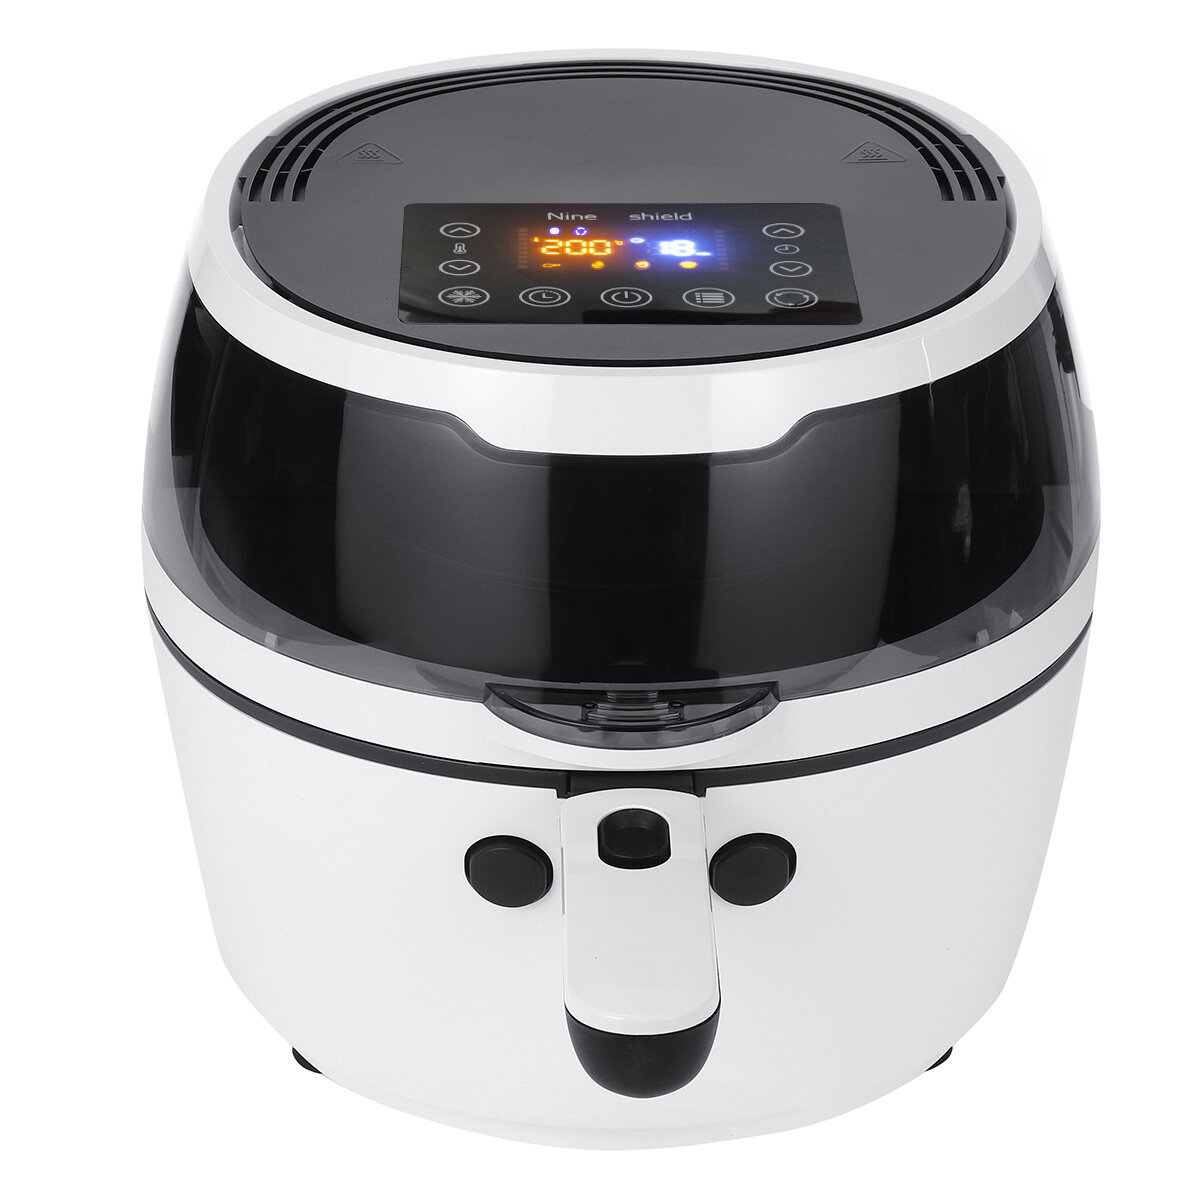 

220V 1500W 8L Multifunctional Automatic Air Fryer Smart Smoke-free Oven Large Capacity for Kitchen